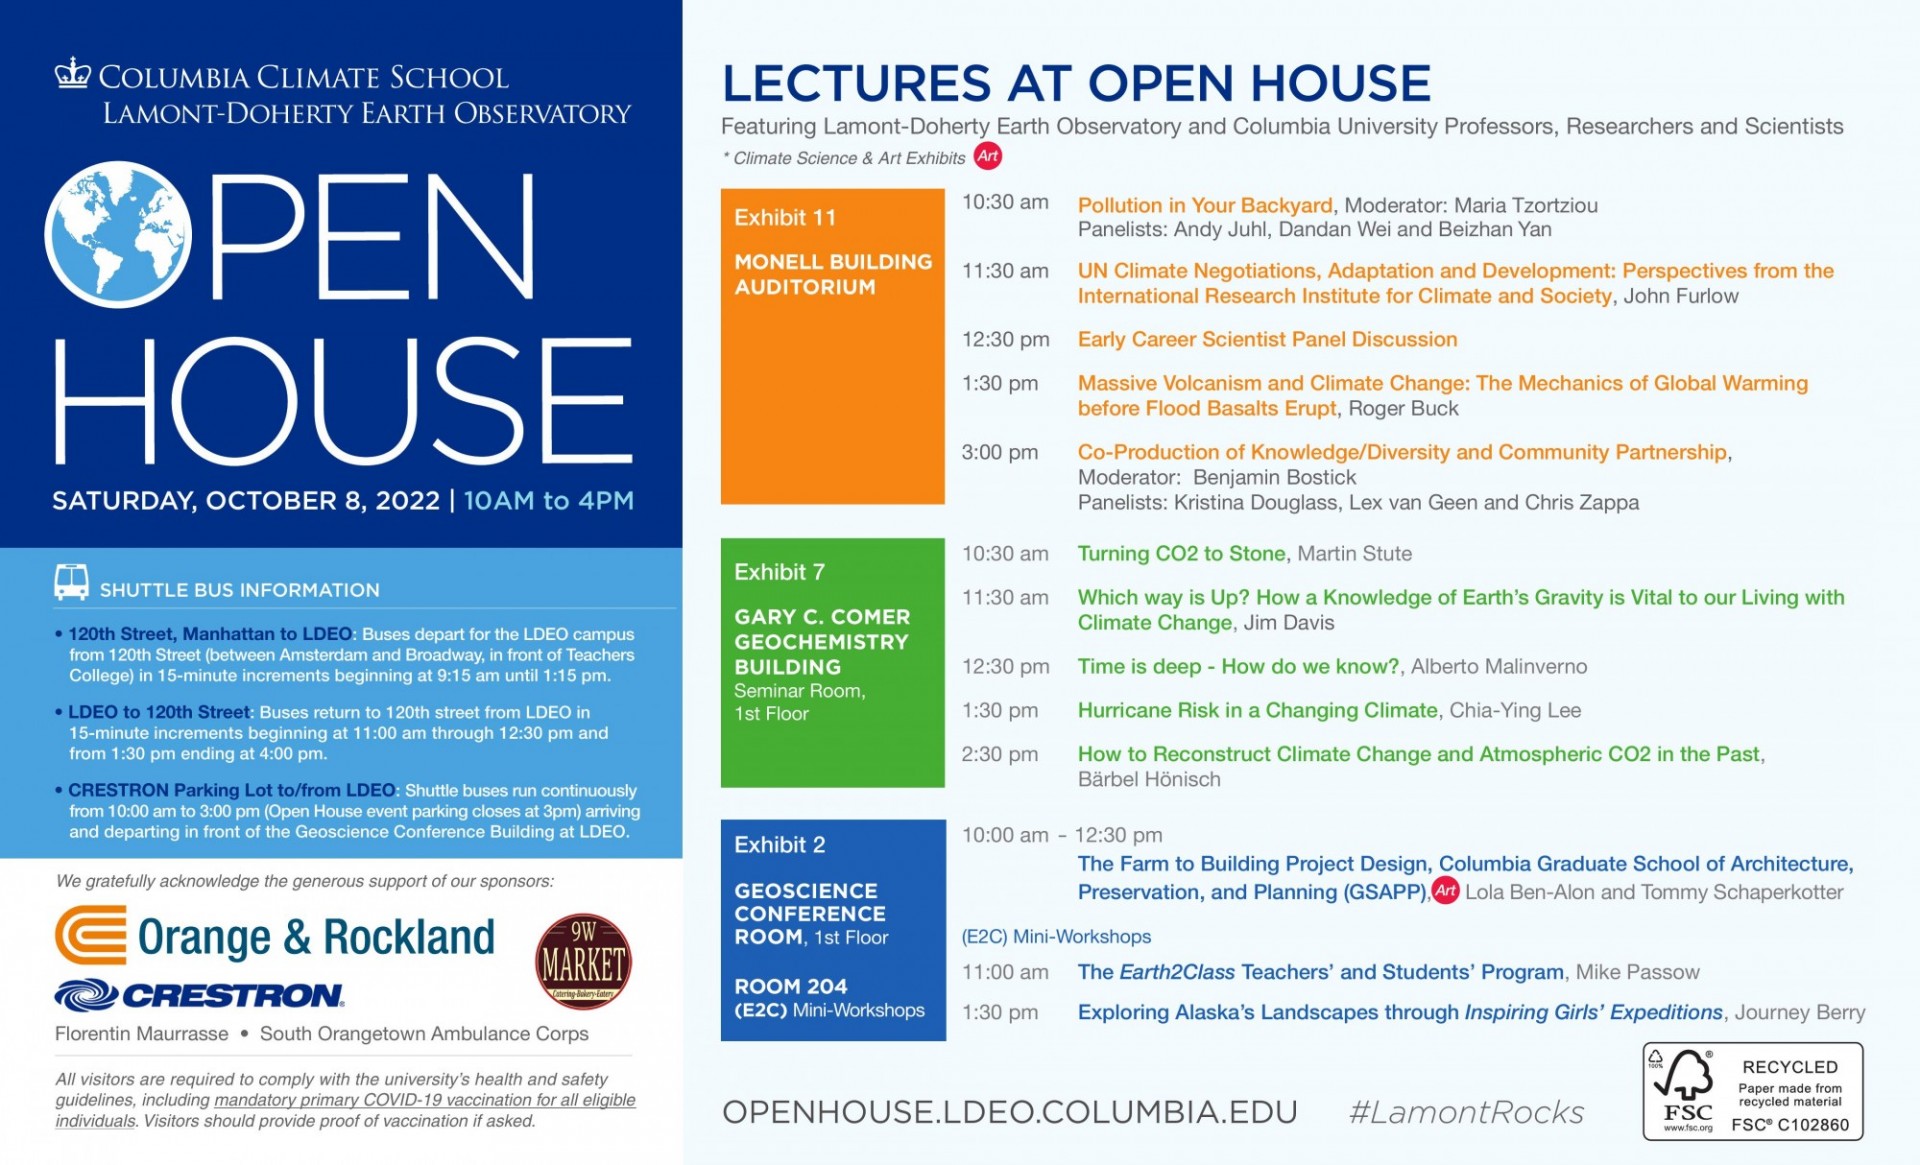 Open House 2022 Lecture Schedule